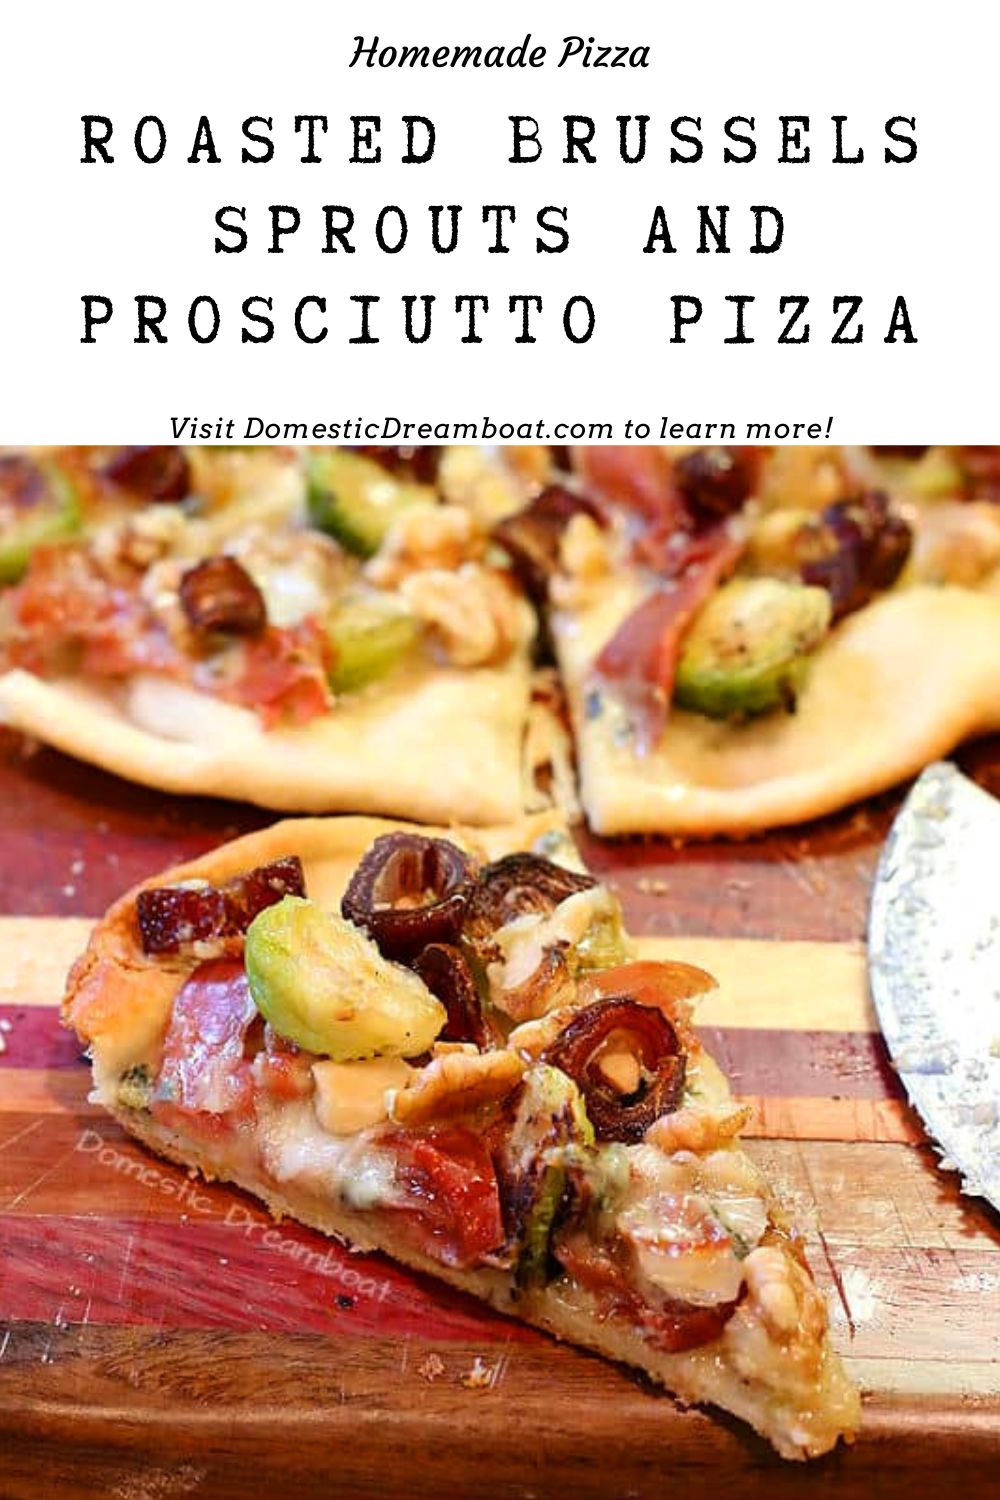 Roasted Brussels Sprout and Prosciutto Pizza on wood cutting board